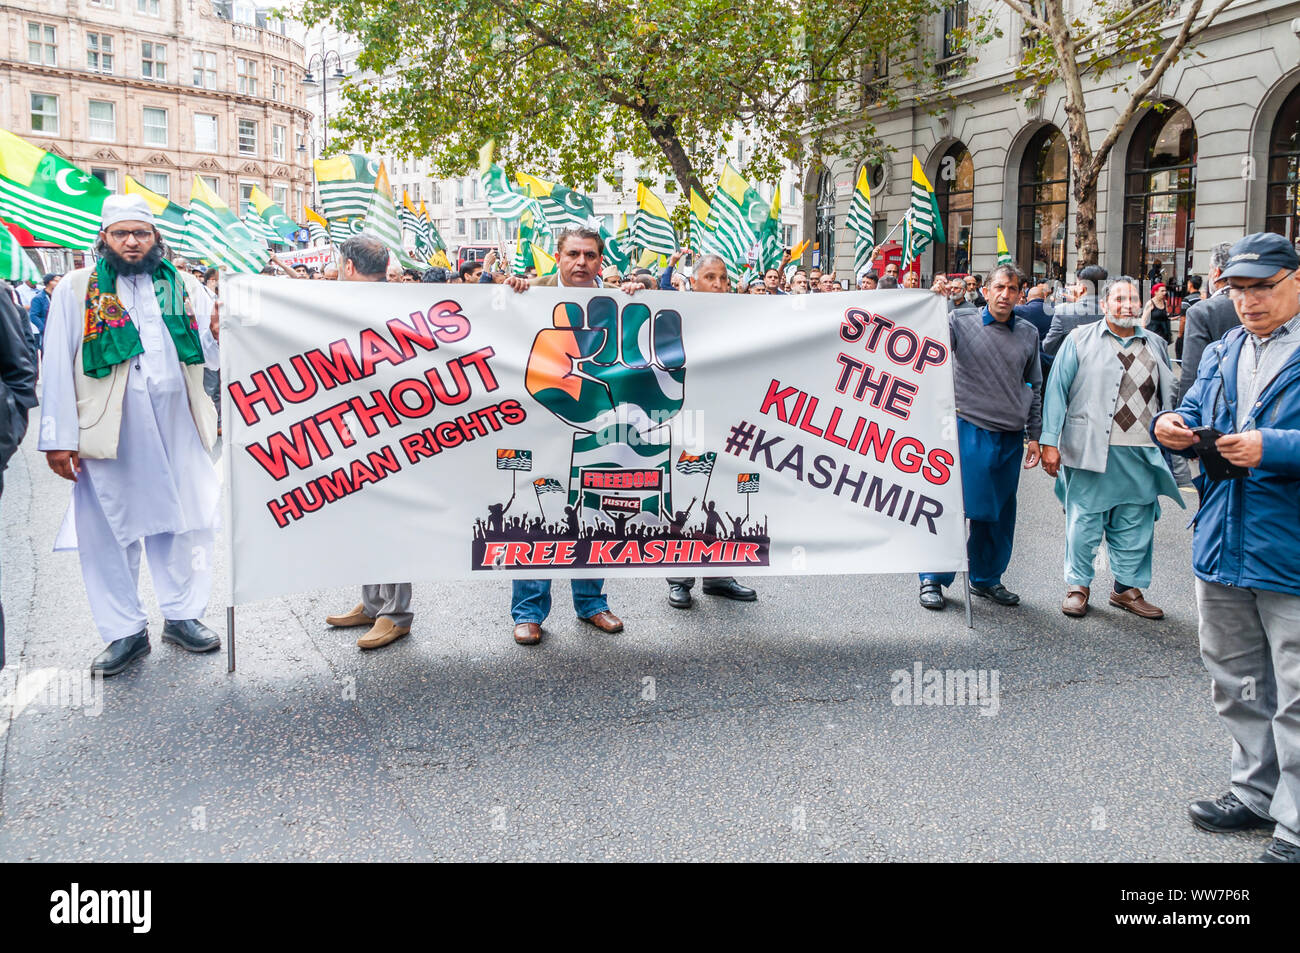 London, England, UK. September 03, 2019: Crowds gather in Indian embassy to protest violent beatings and even torture in Indian-administered Kashmir Stock Photo